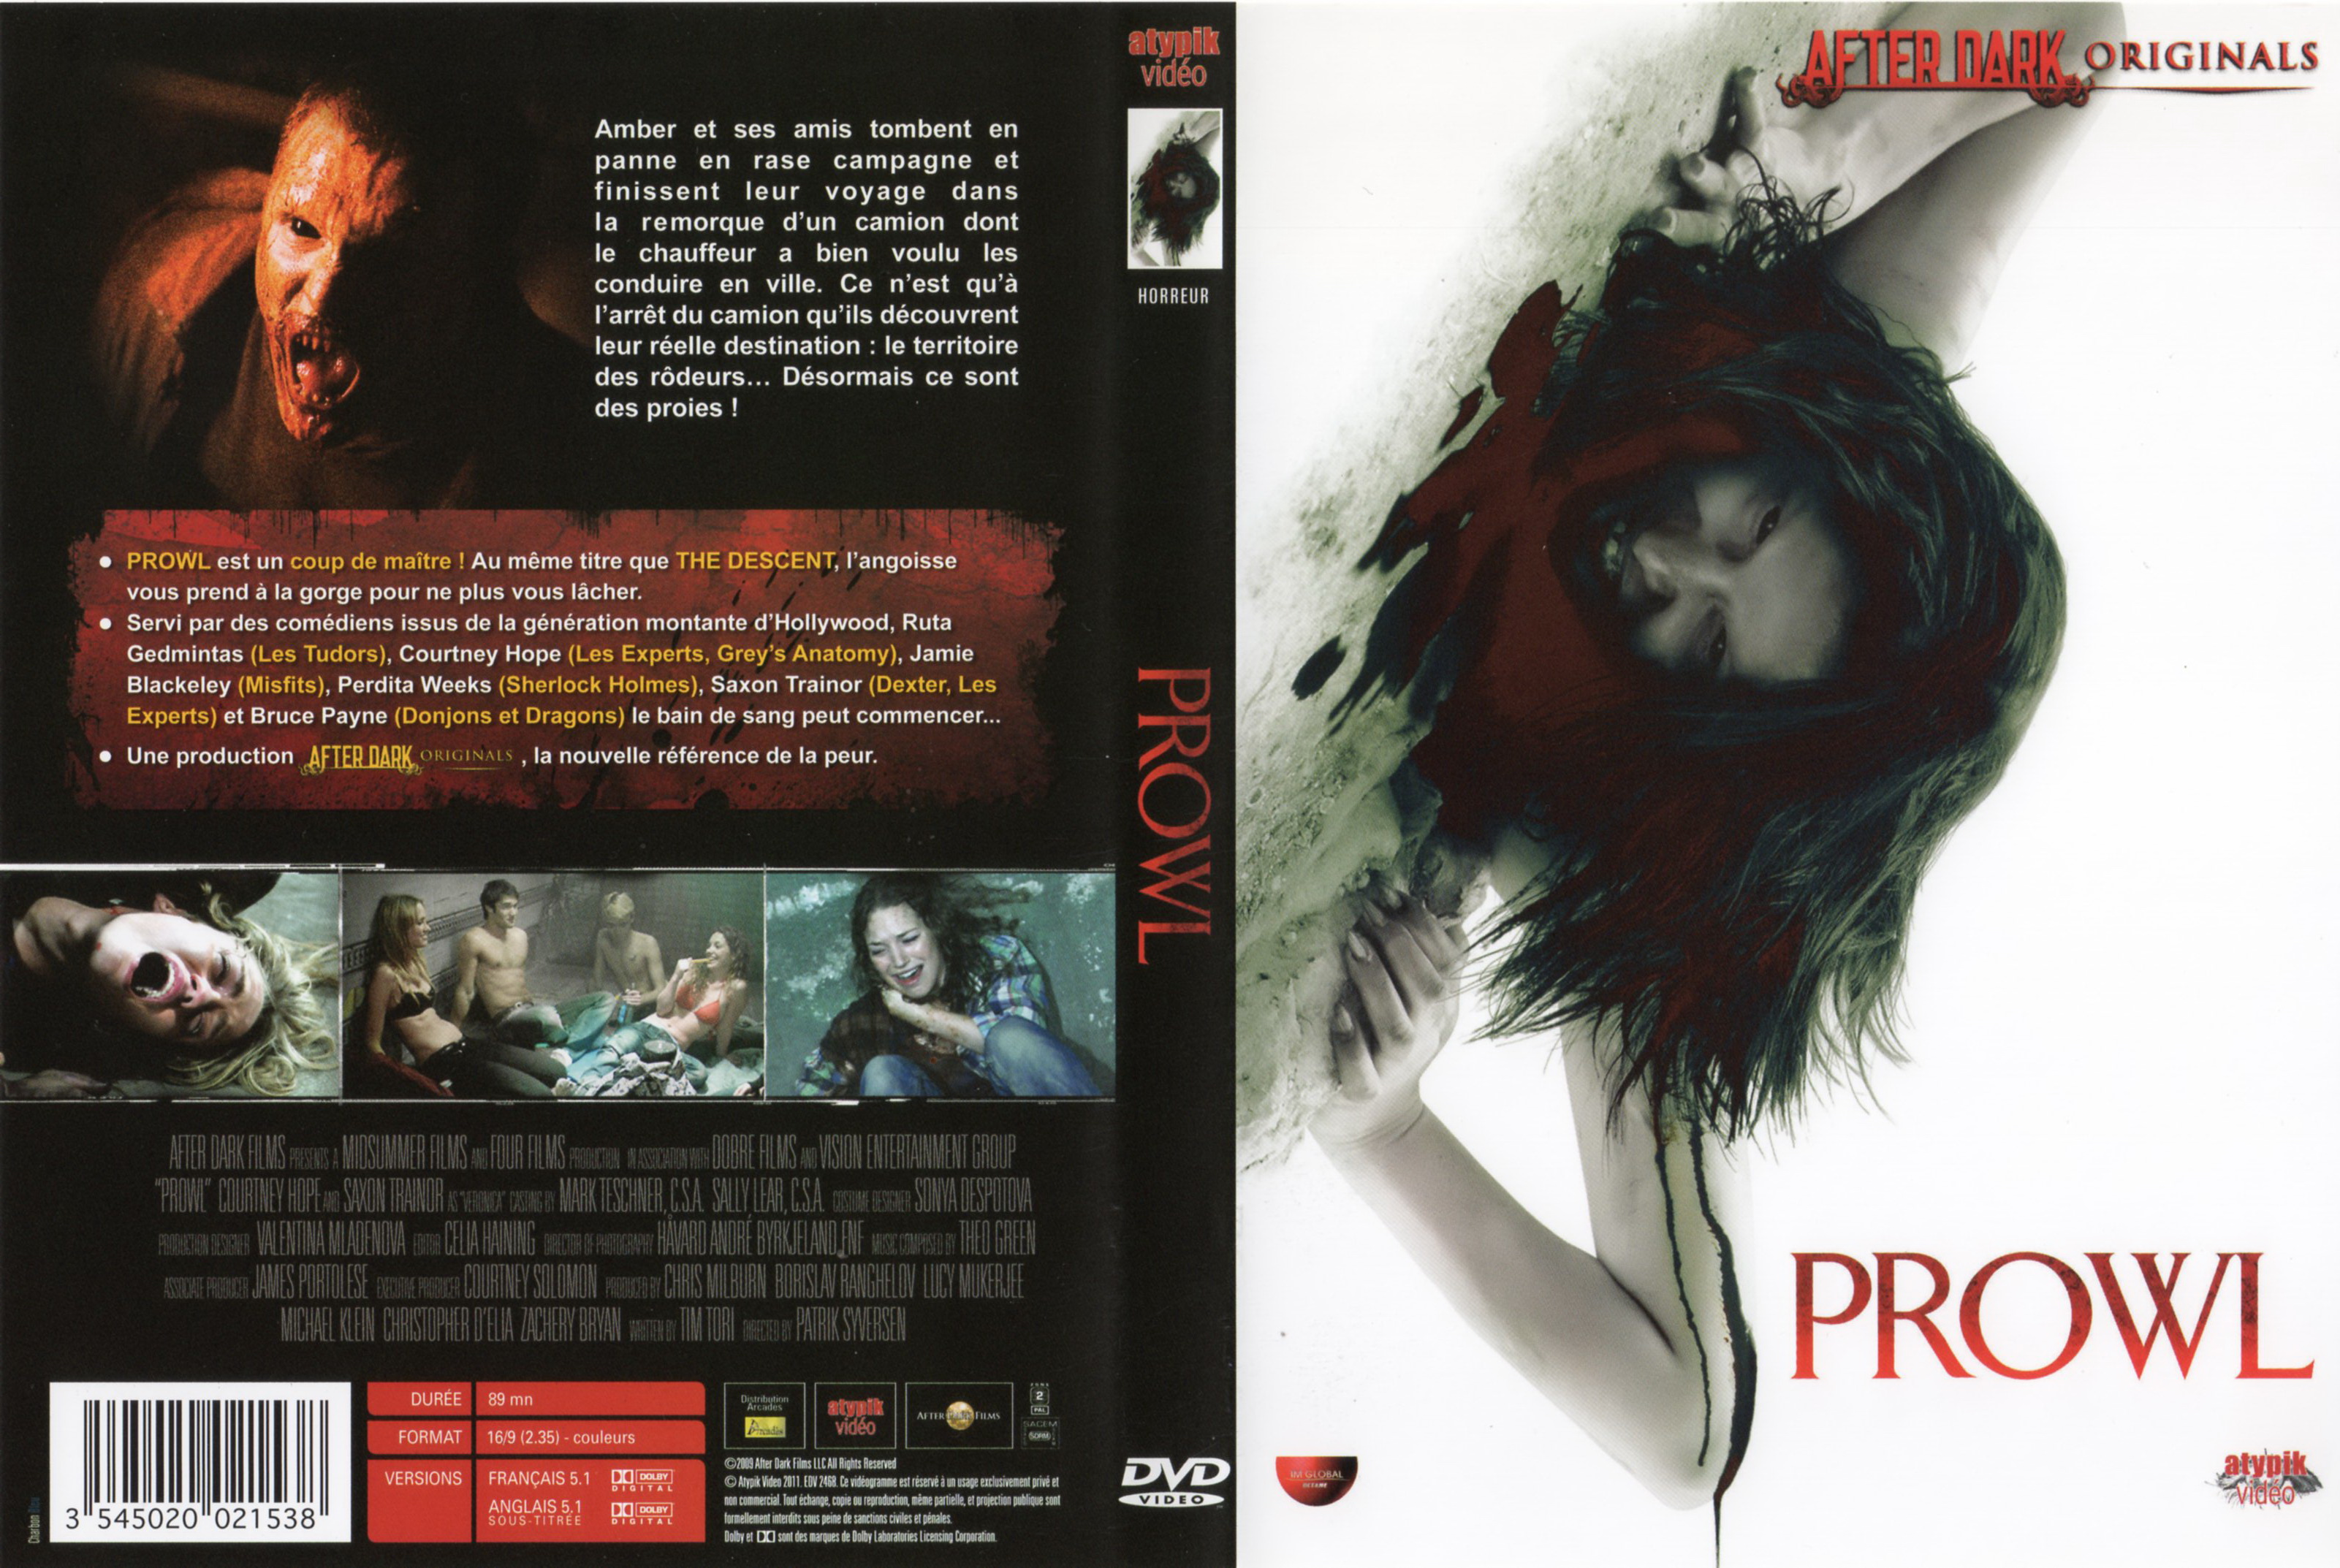 Jaquette DVD Prowl